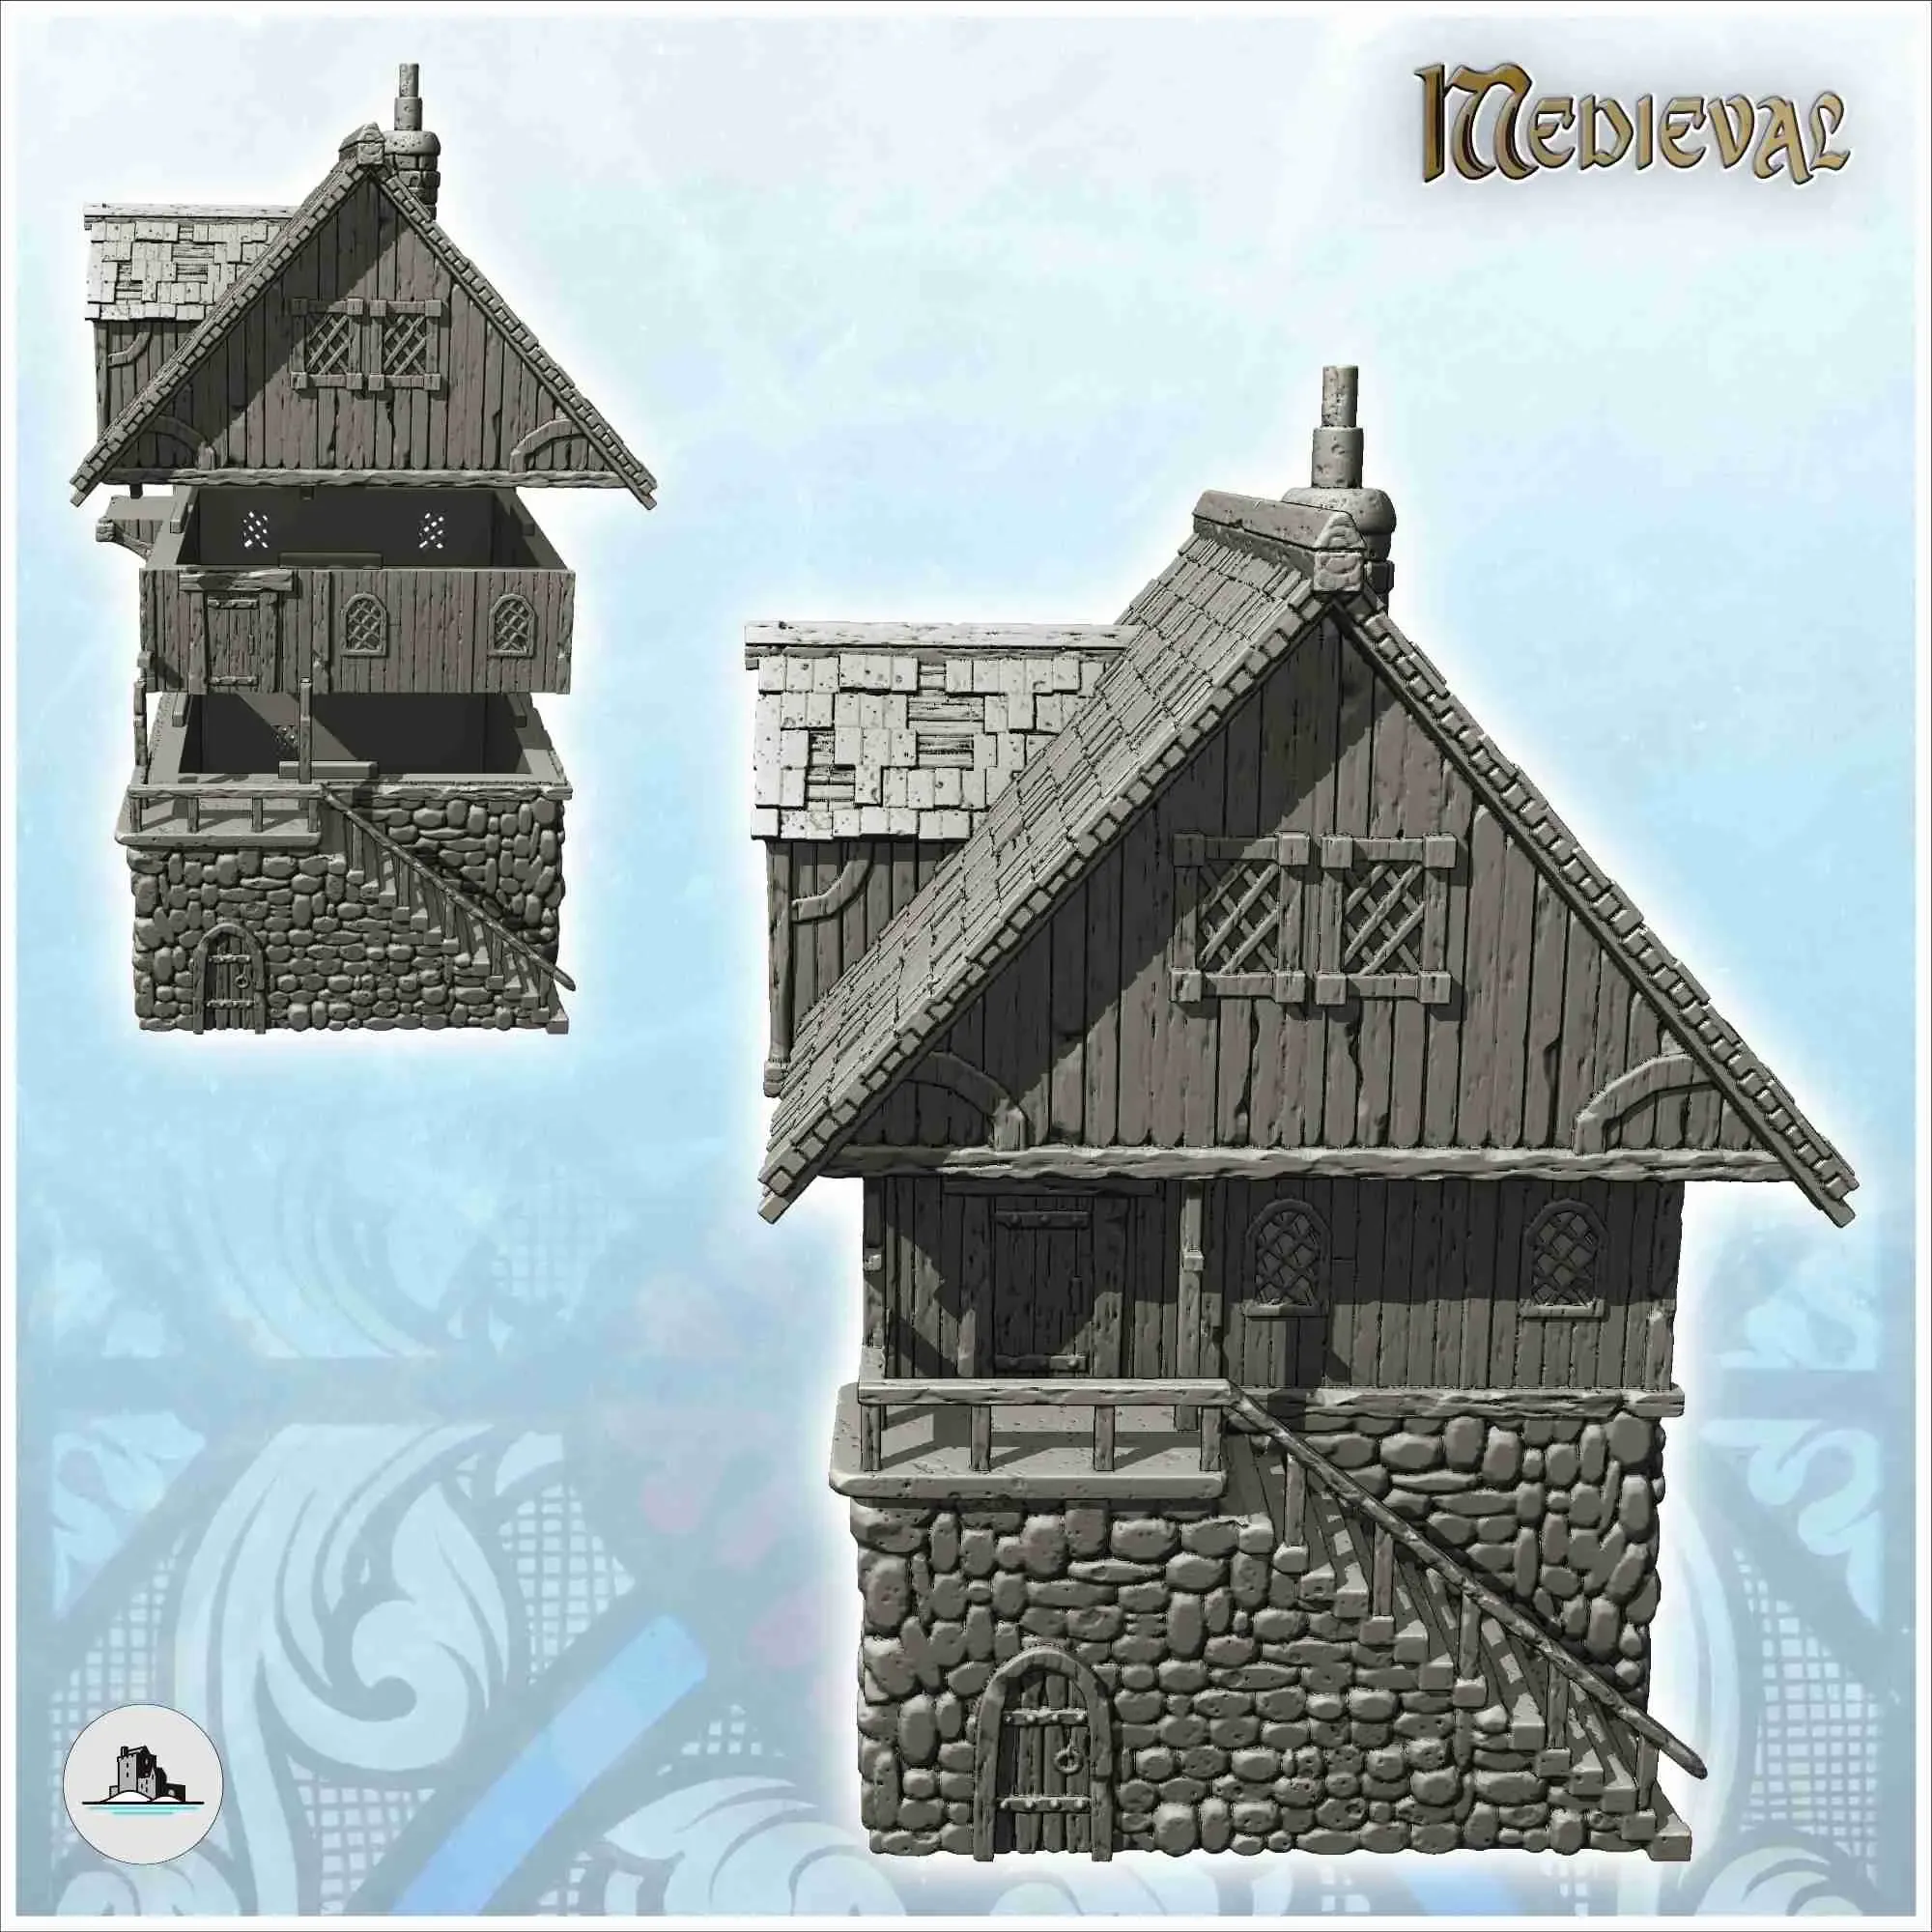 Medieval tavern with large entrance staircase and tiled roof